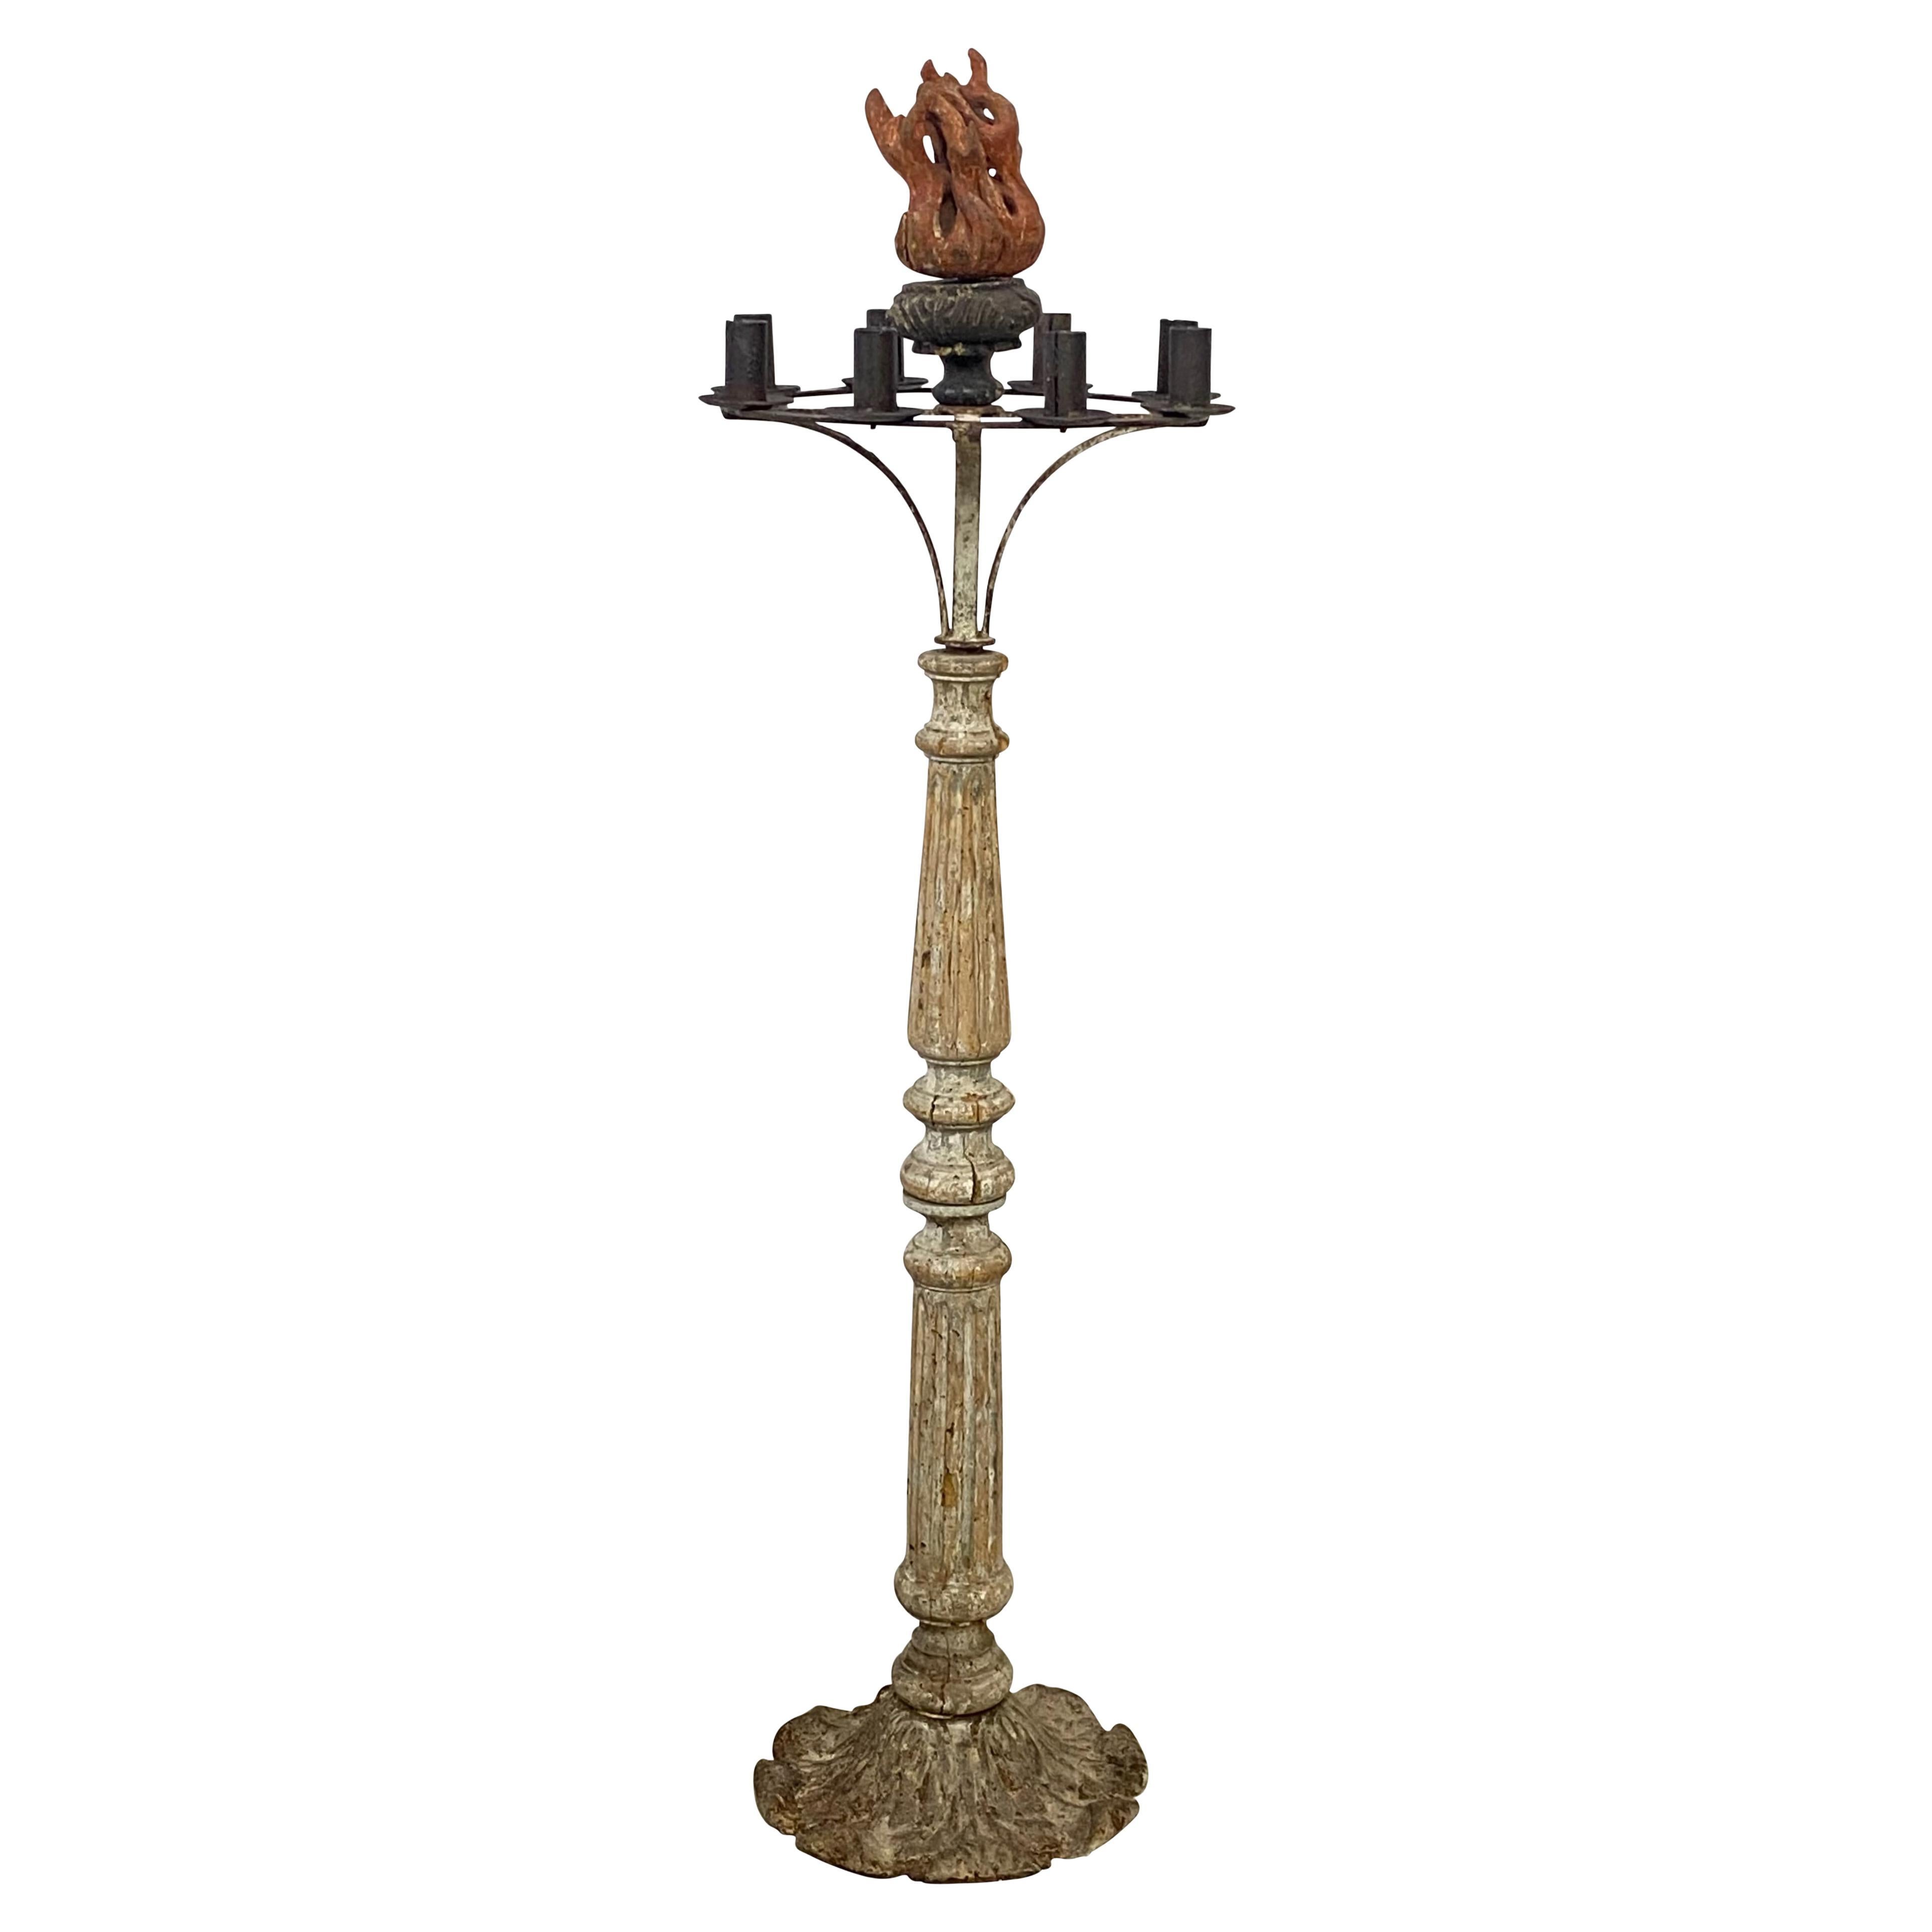 Early 18th Century Italian Carved Wood and Cast Iron Candelabra Candle Stand